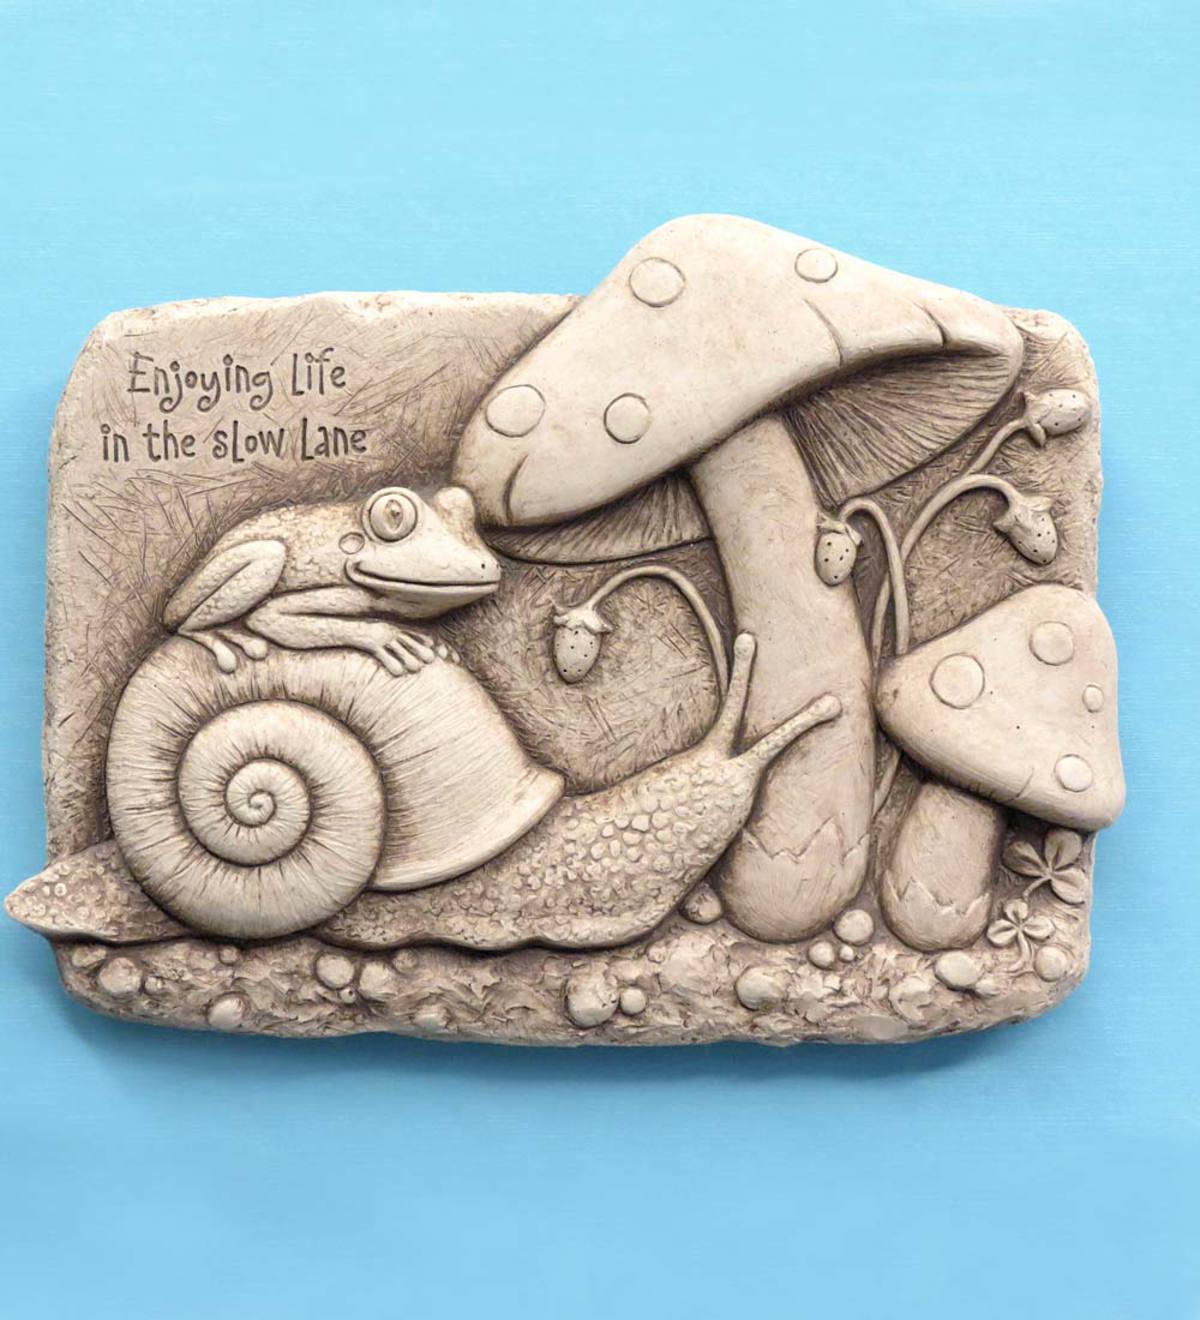 Life in the Slow Lane Stone Plaque by Carruth Studio